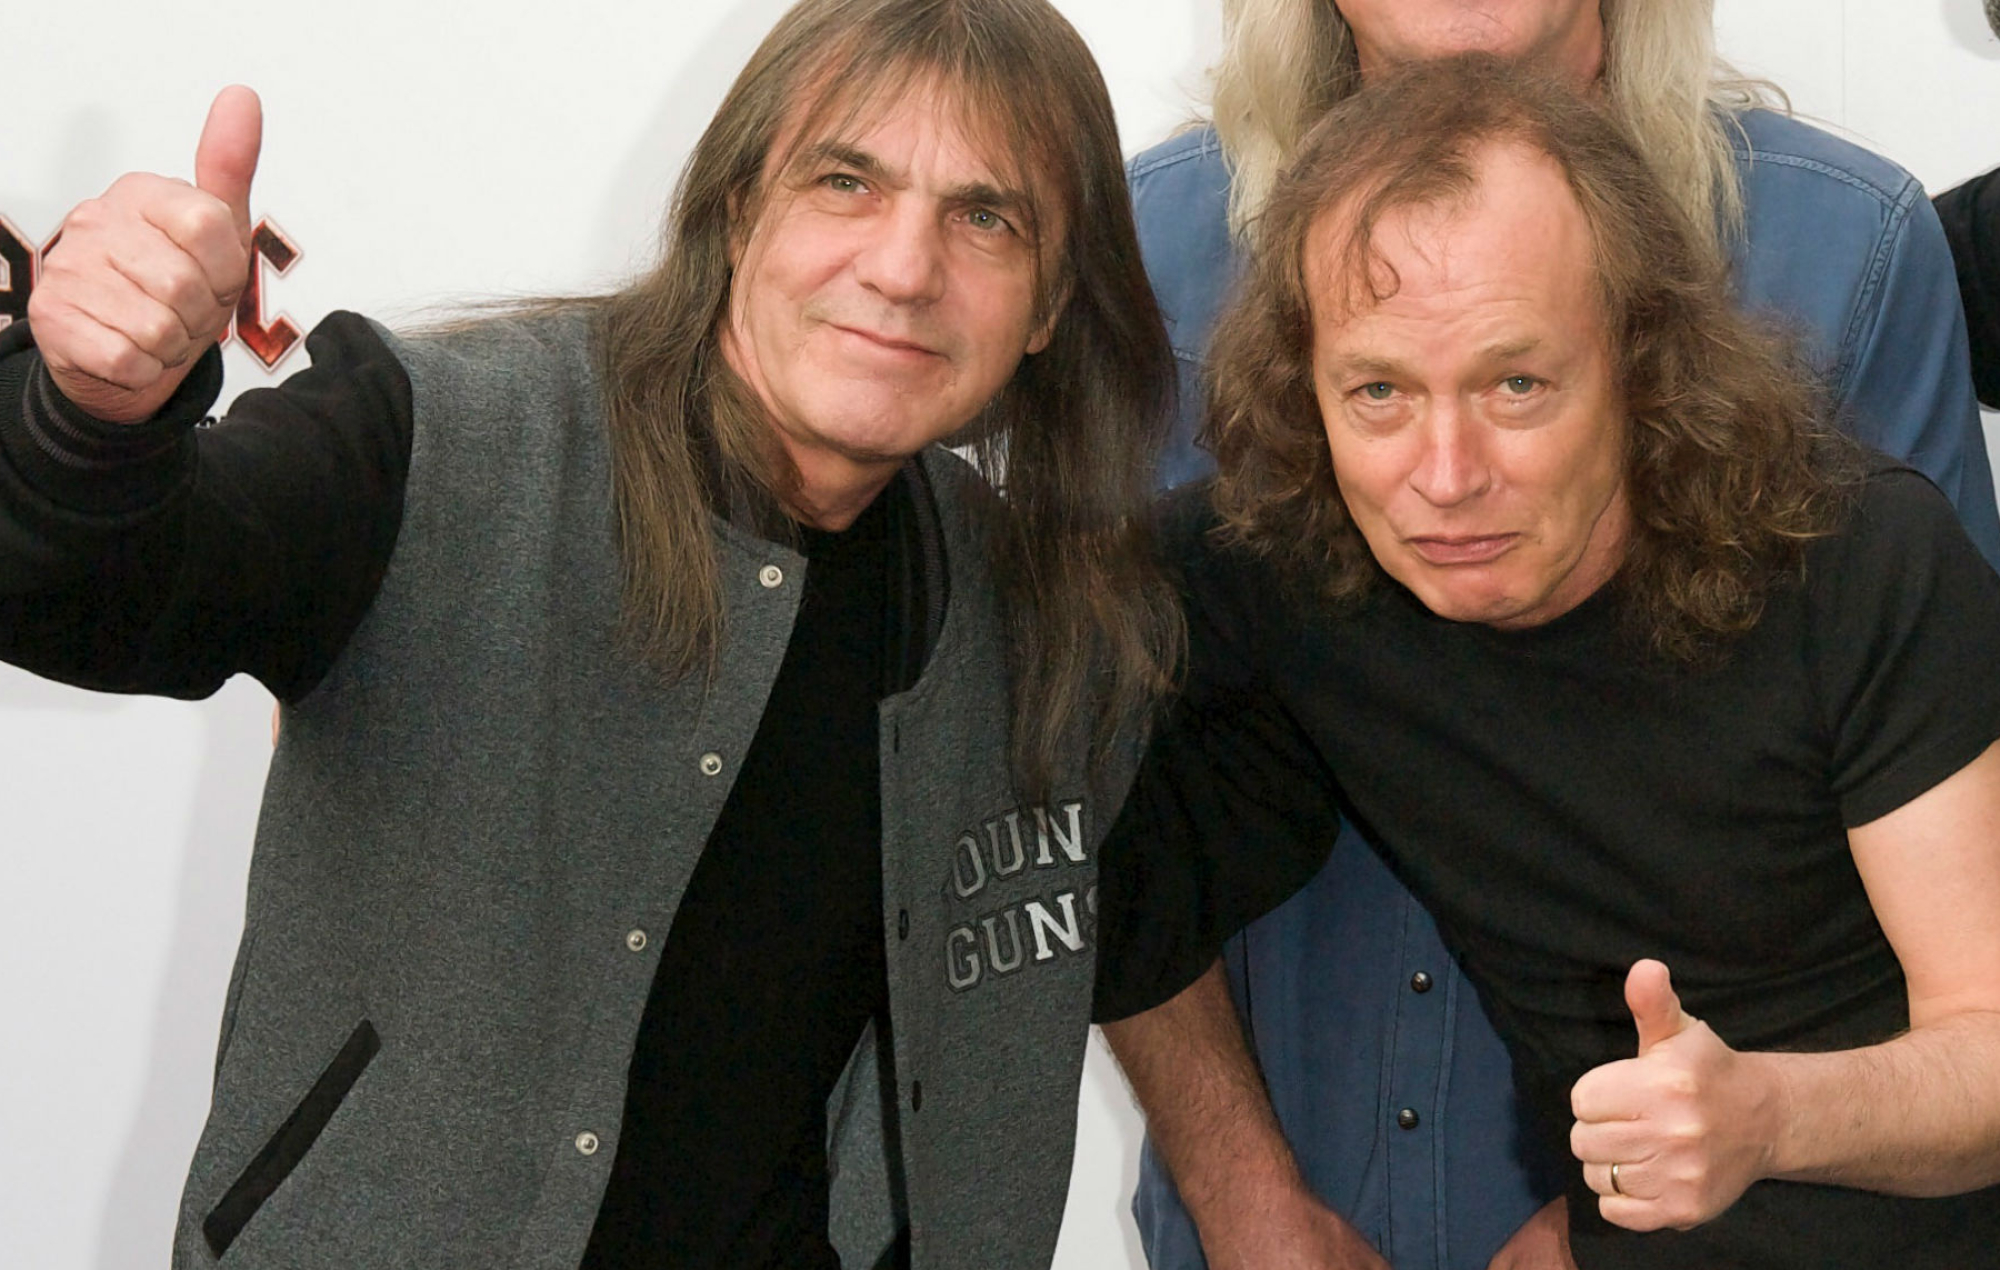 Malcolm Young, Emotional interview, Angus Young's tribute, Battle with dementia, 2000x1270 HD Desktop